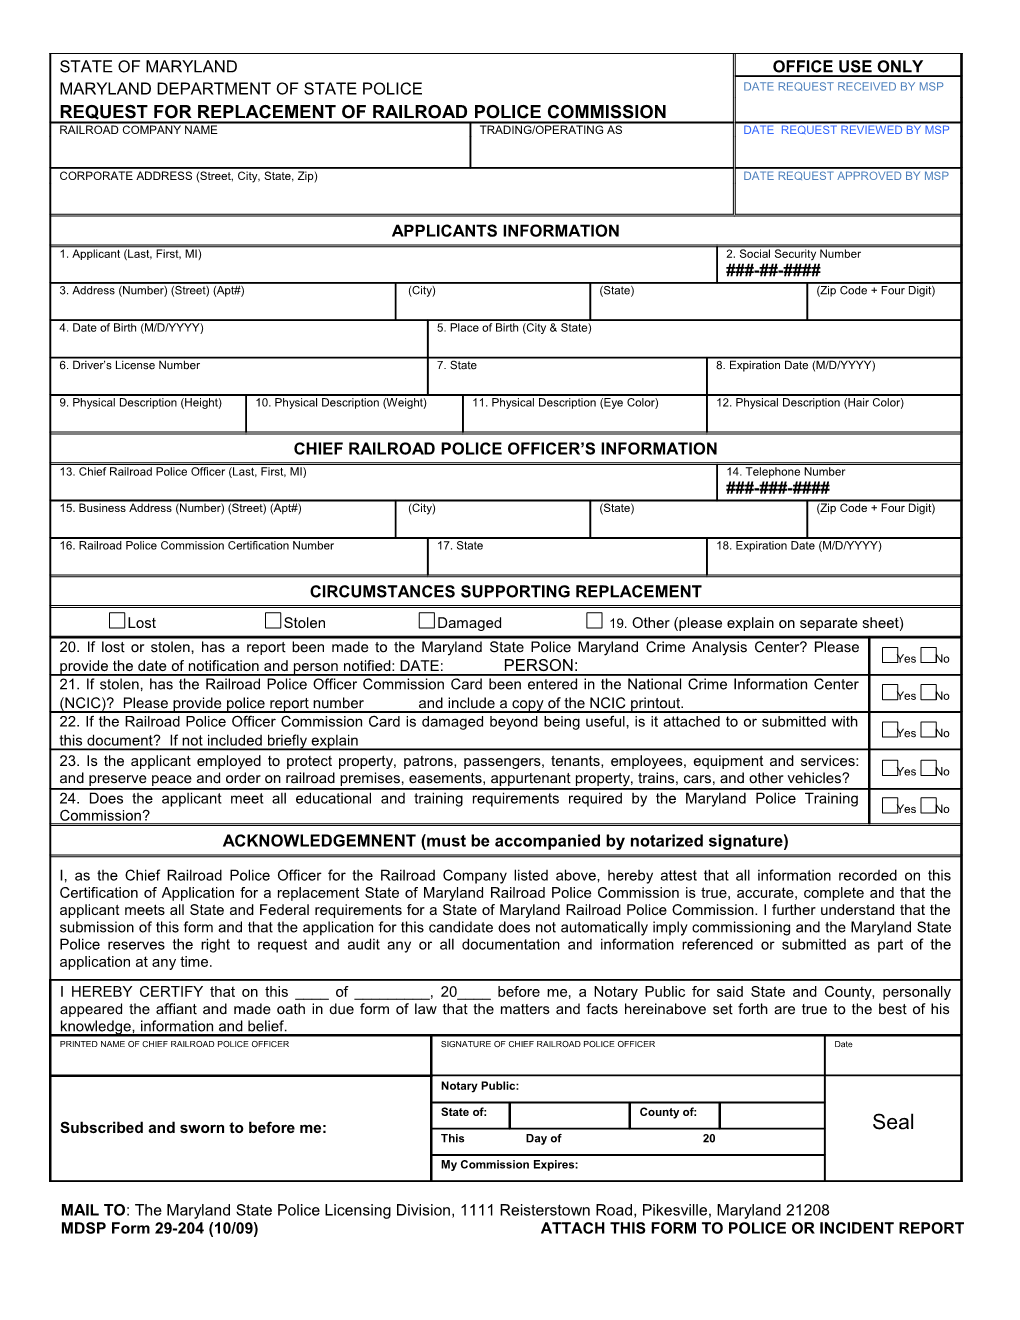 MDSP Form29-204 (10/09)ATTACH THIS FORM to POLICE OR INCIDENT REPORT